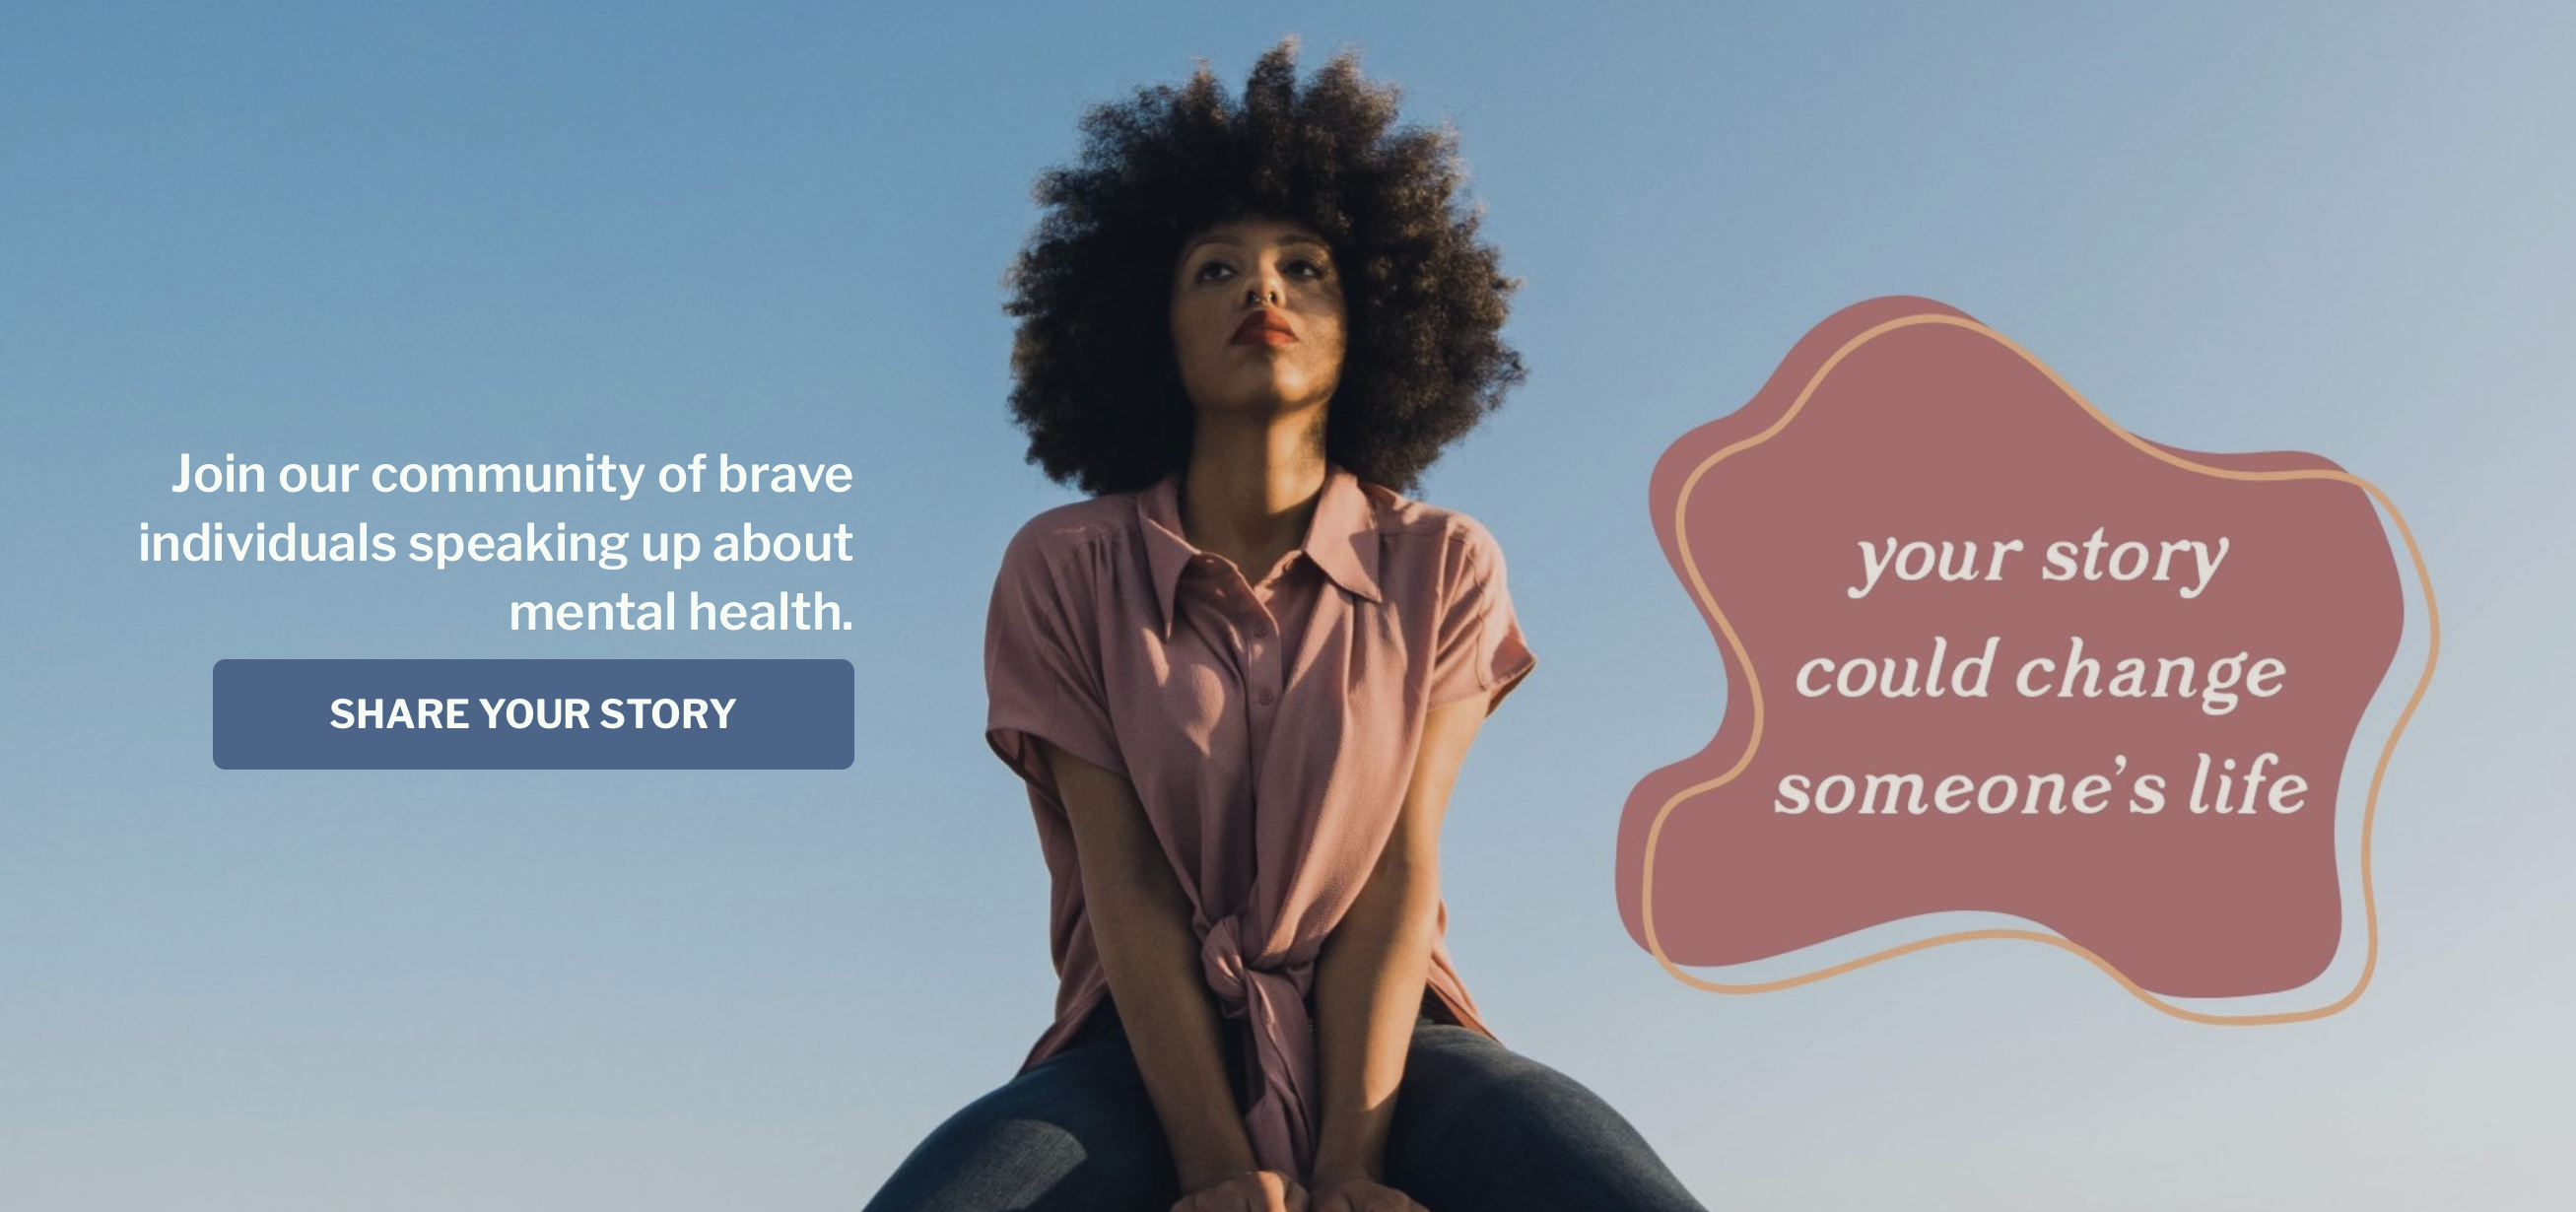 A woman sits and looks off into the distance. Text next to her reads Join our community of brave individuals speaking up about mental health, your story could change someone's life.